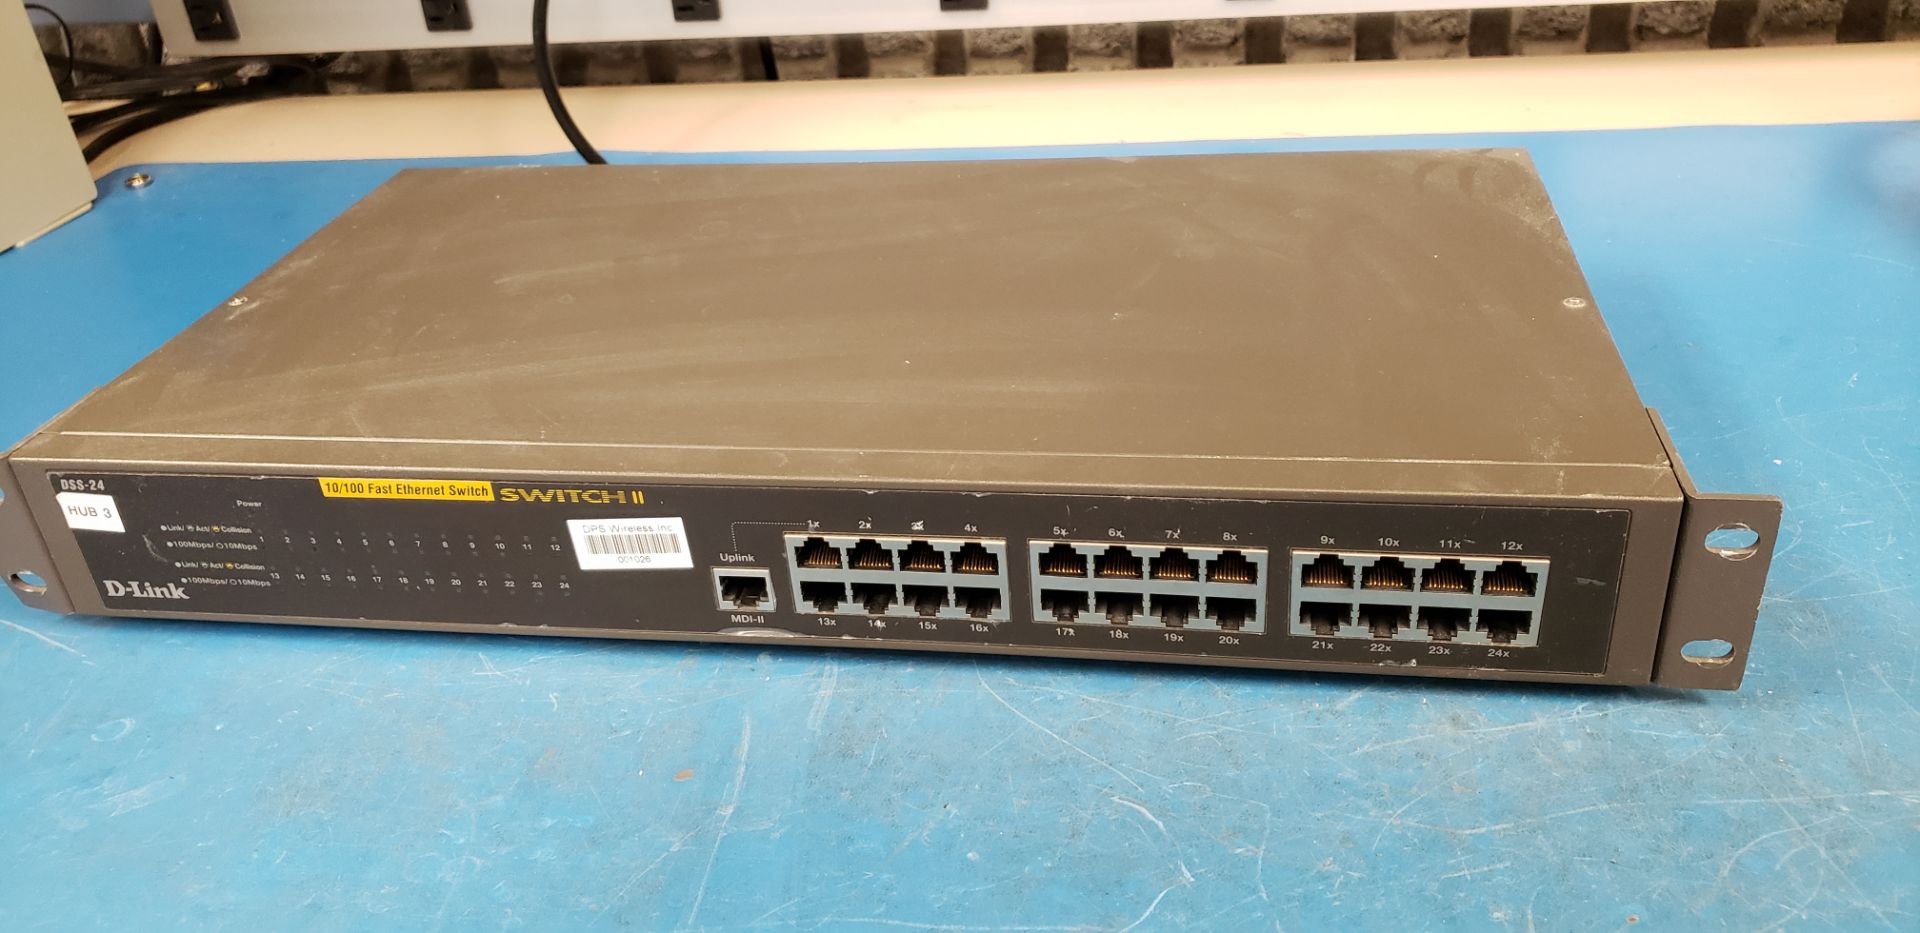 D-Link "DSS-24" 10/100 Fast Ethernet Switch II - Image 2 of 2